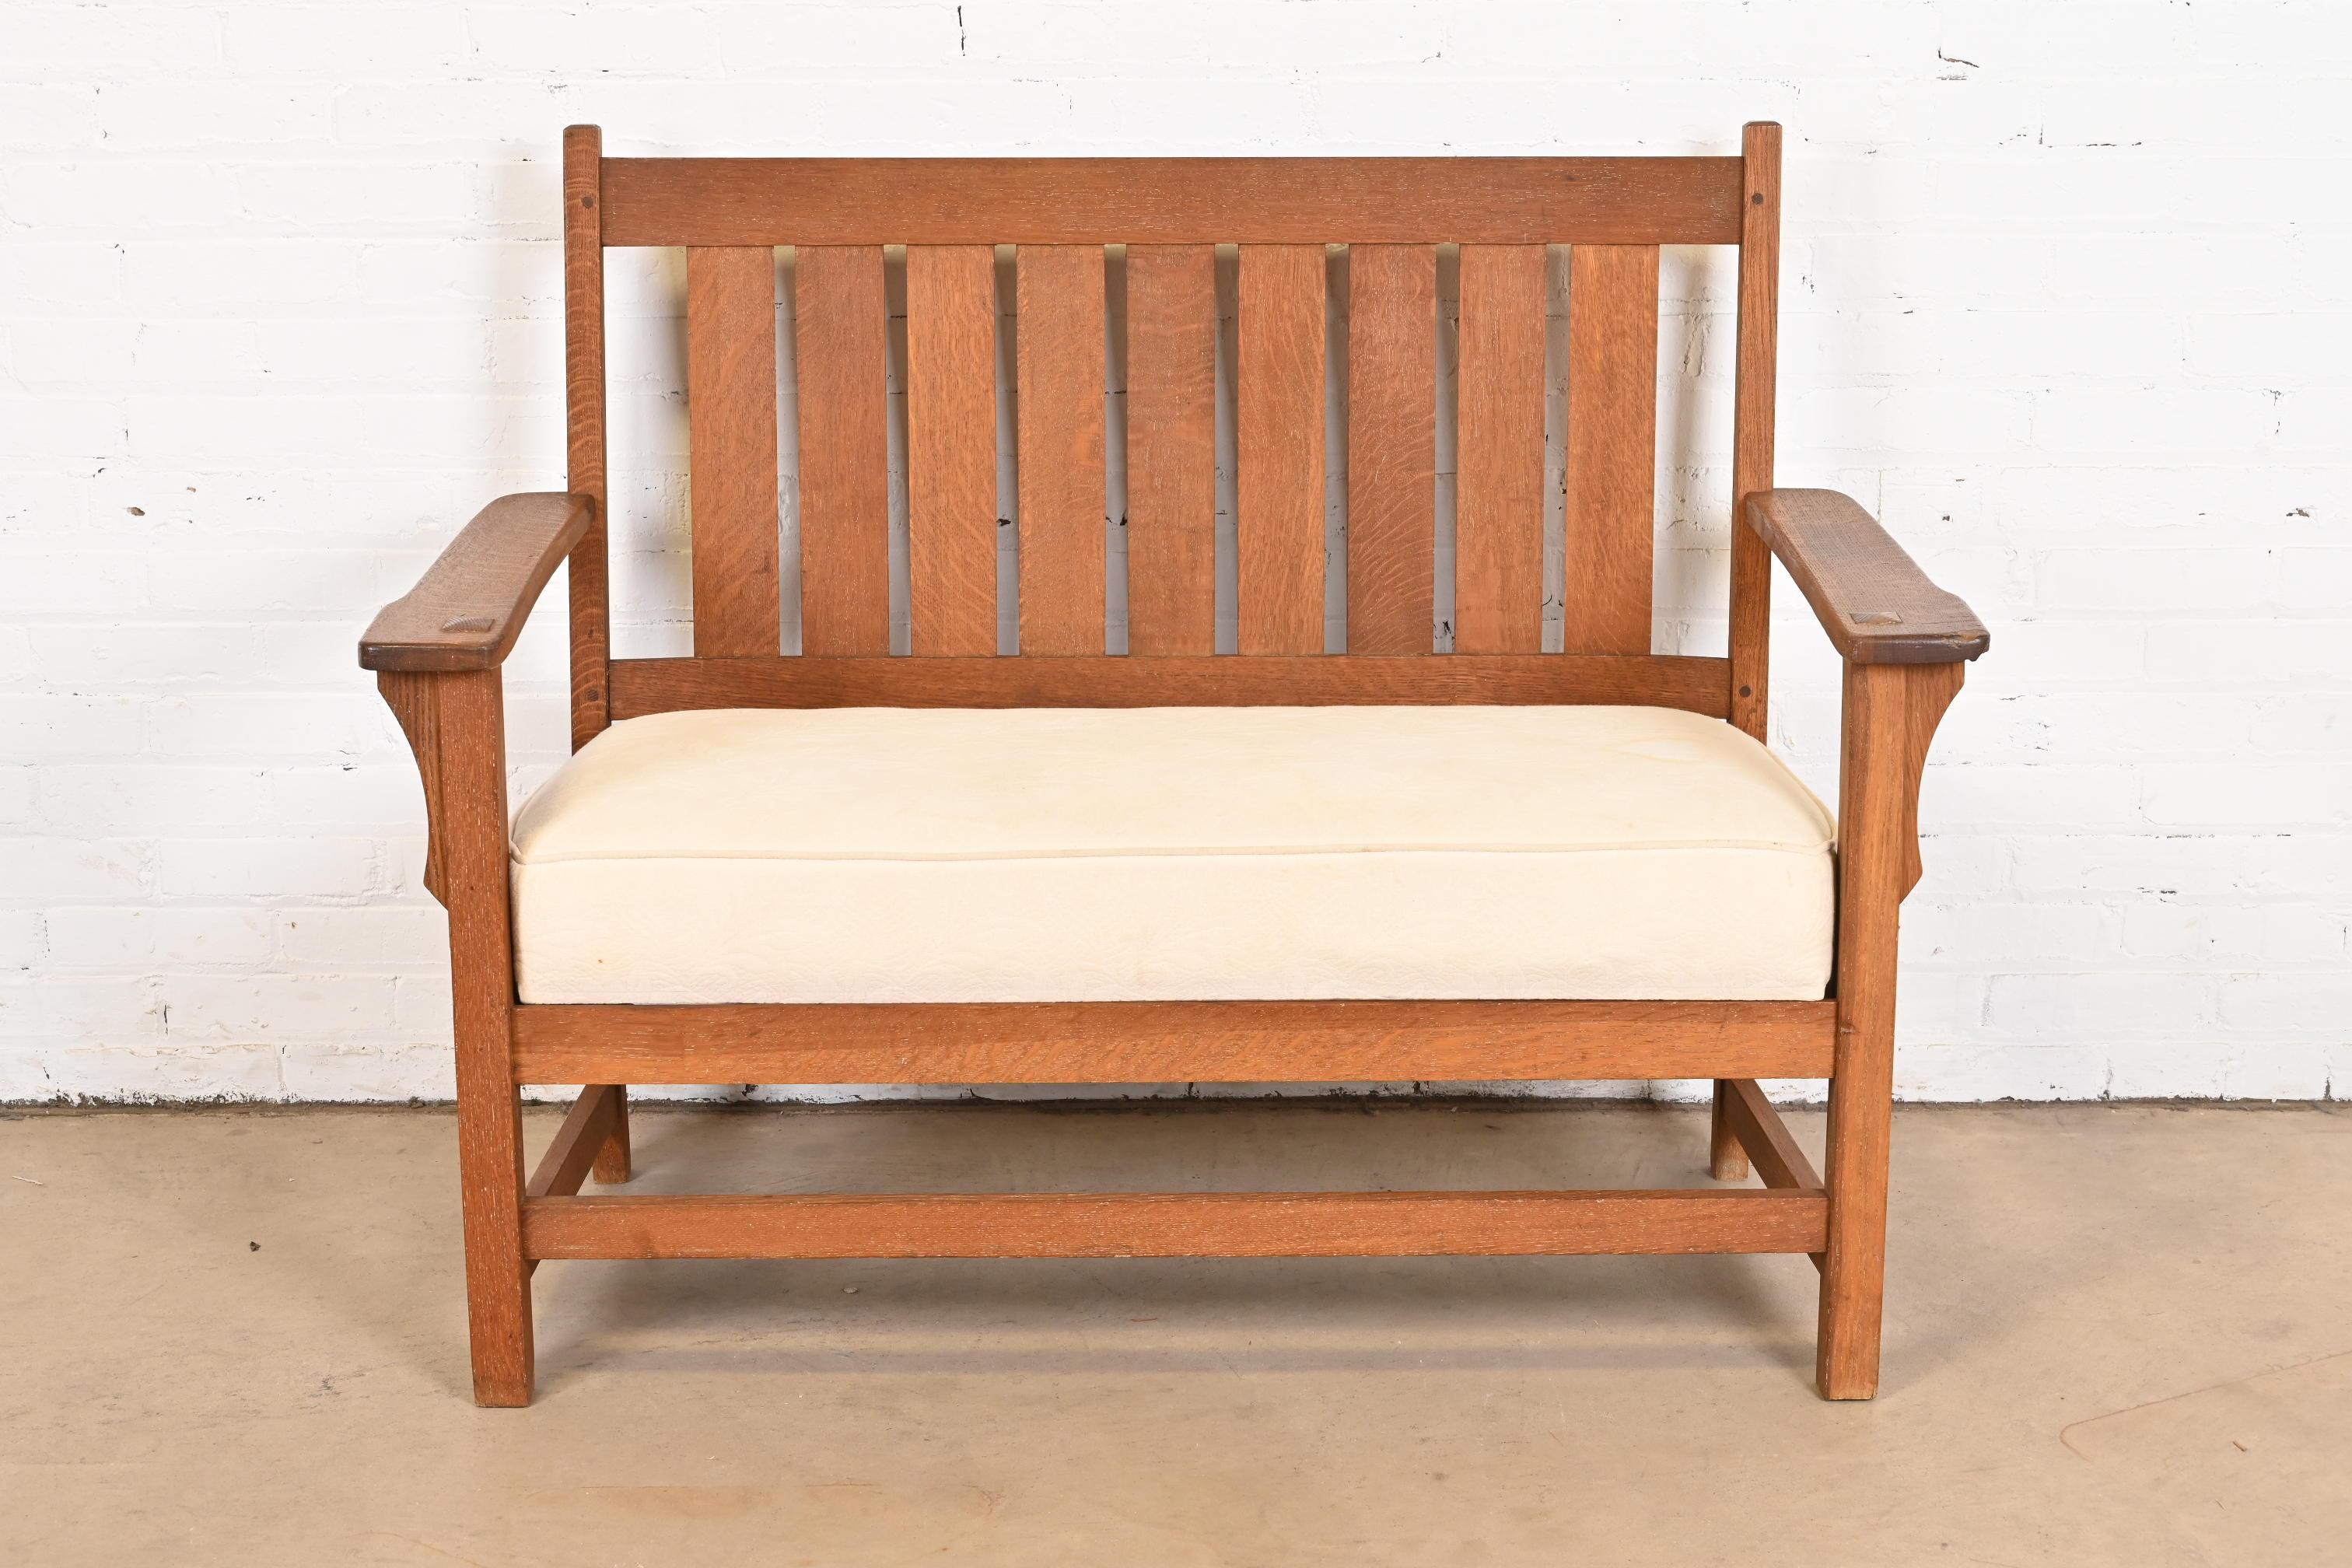 A beautiful Mission or Arts & Crafts loveseat, settee, or bench.

In the manner of Gustav Stickley.

USA, circa 1900.

Solid quarter sawn oak, with cream upholstered seat cushion.

Measures: 48.25